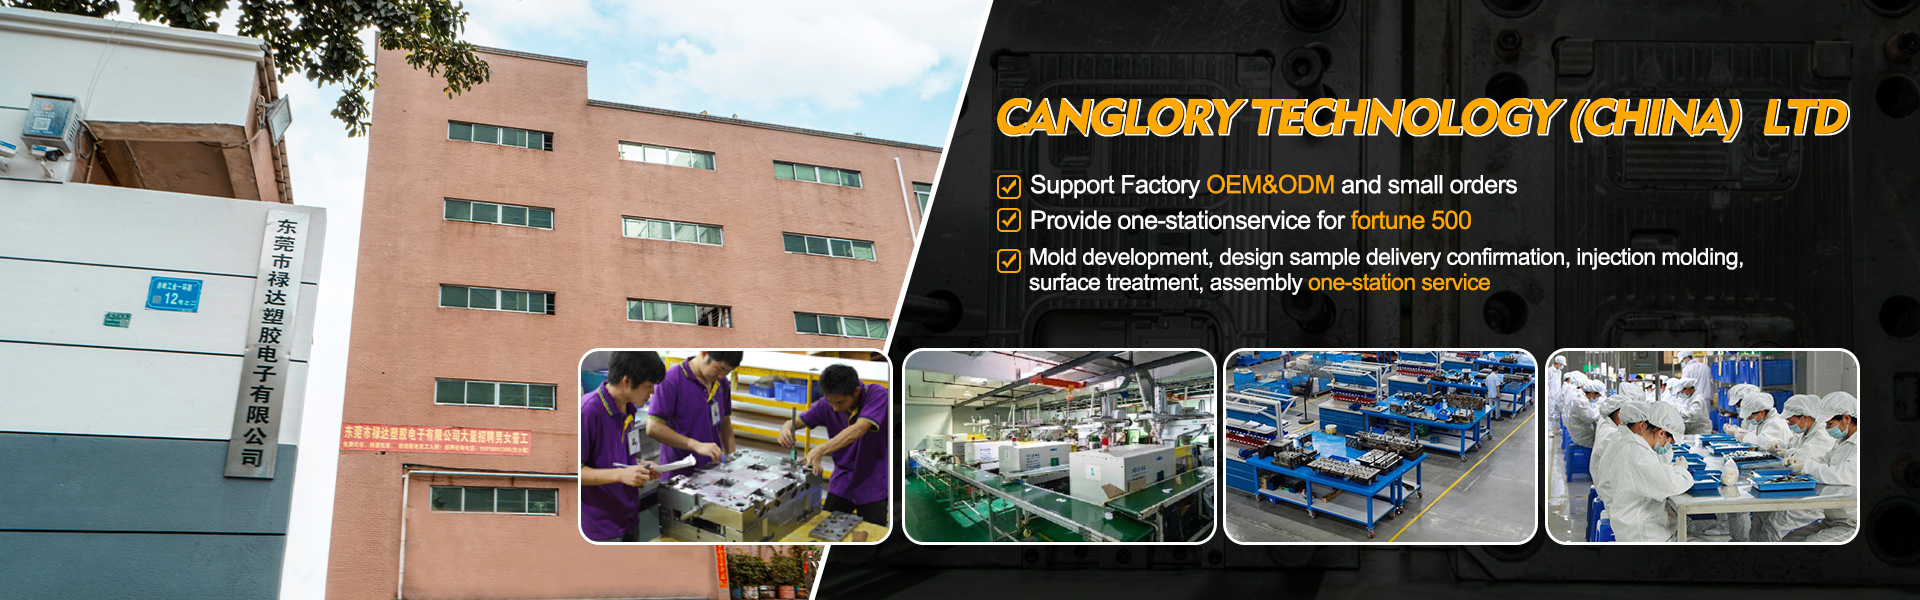 Home - moulding,injection,original equipment manufacturer | Canglory technology (China)  LTD